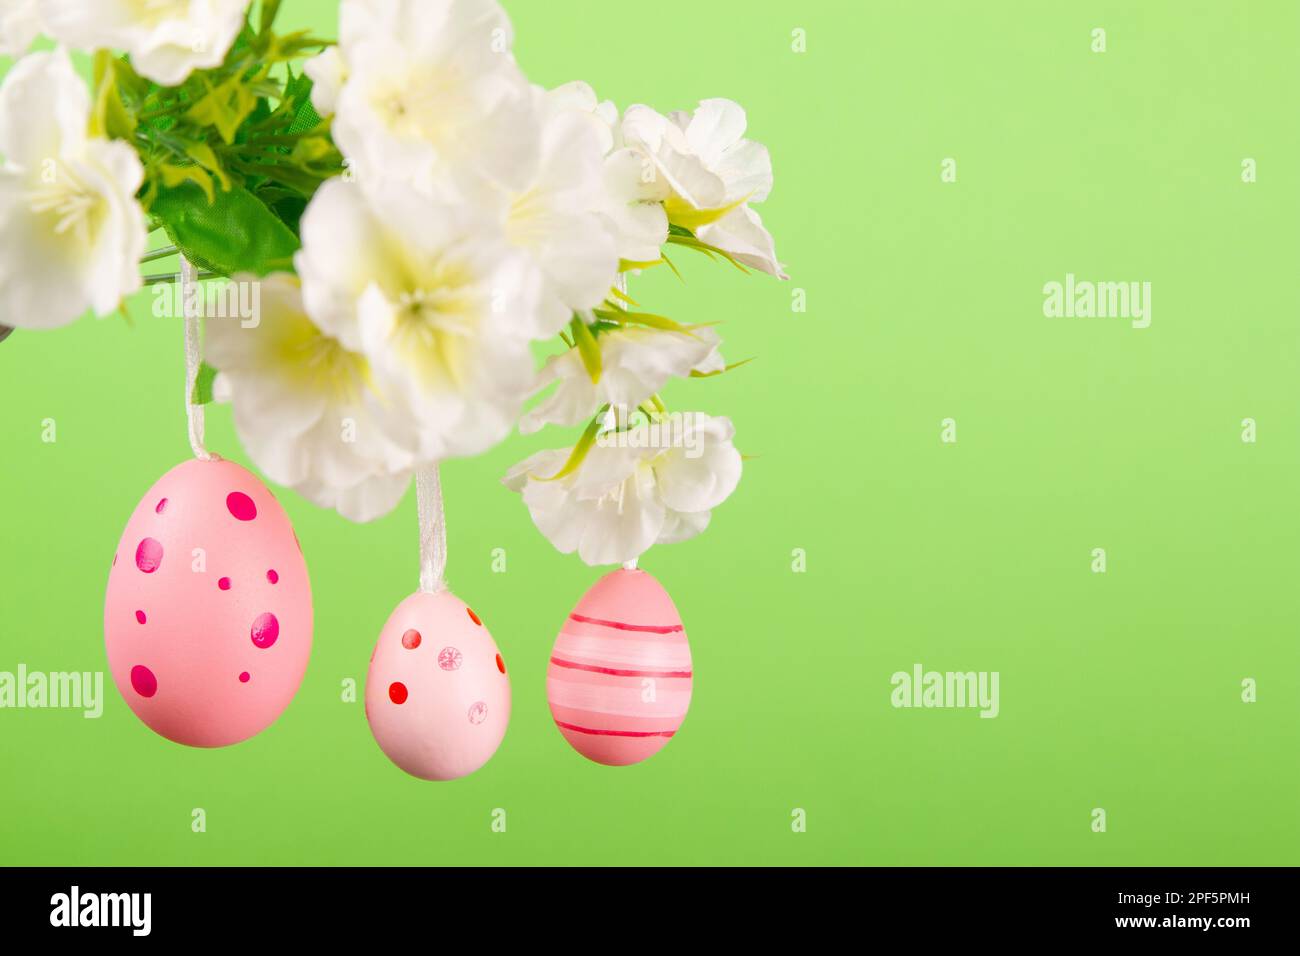 Capture the essence of Easter with this picturesque image of three pink eggs hanging from a delicate branch in full bloom, contrasting against light g Stock Photo